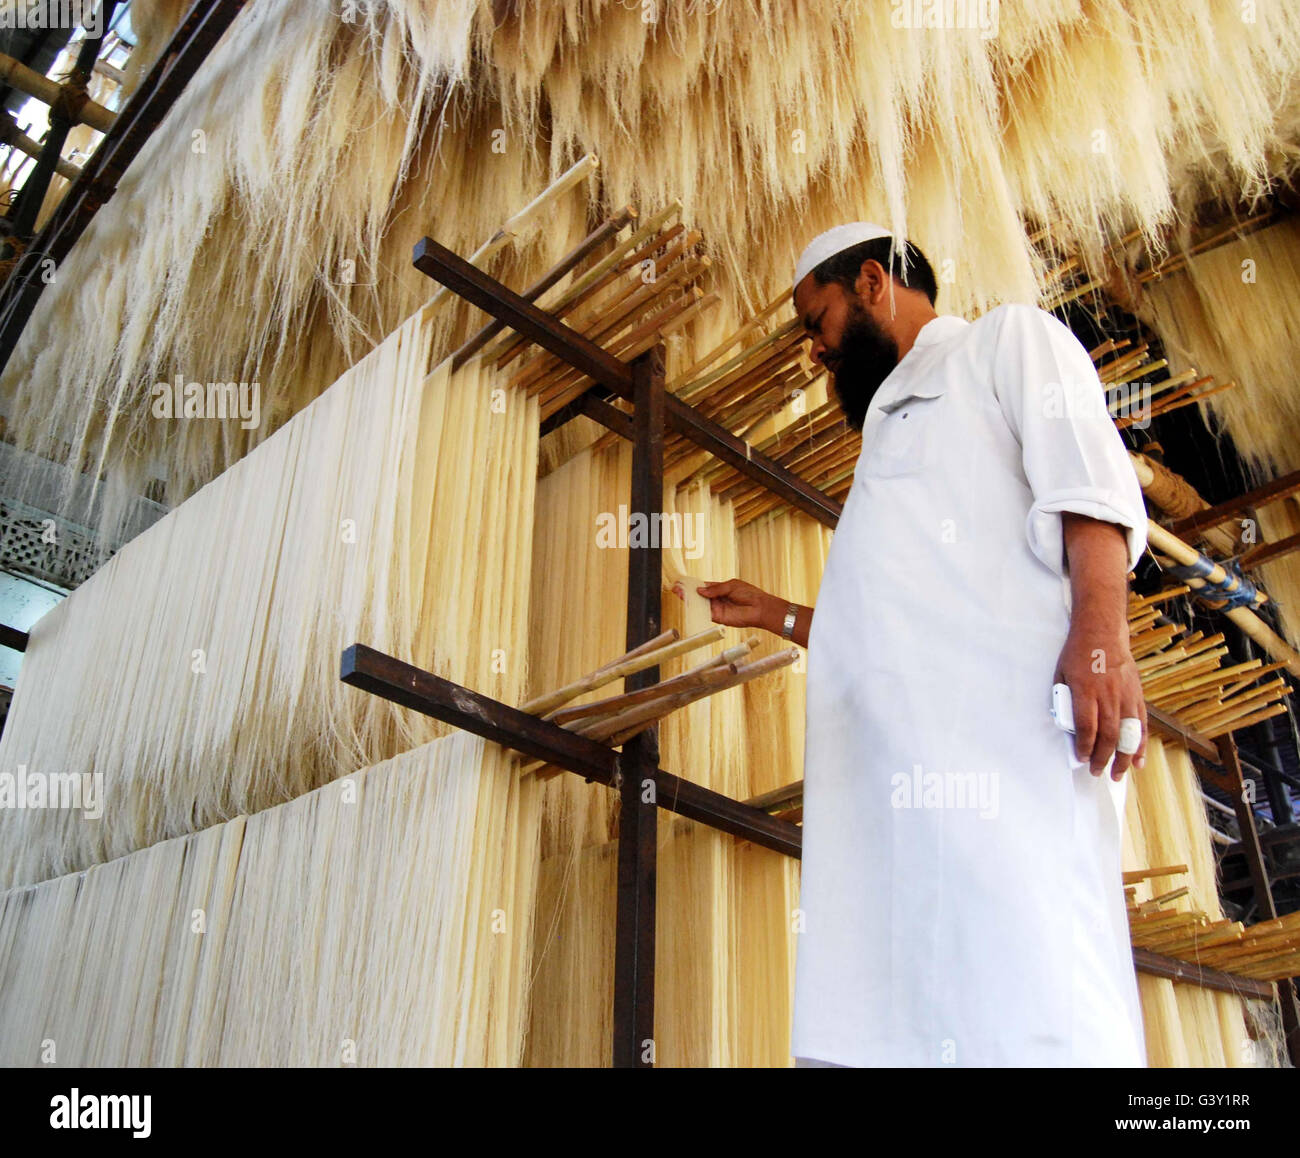 Bhopal, India. 16th June, 2016. A worker prepares 'Sewayian', or vermicelli, as food for breaking fast during the holy month of Ramadan in Bhopal, India, June 16, 2016. © Stringer/Xinhua/Alamy Live News Stock Photo